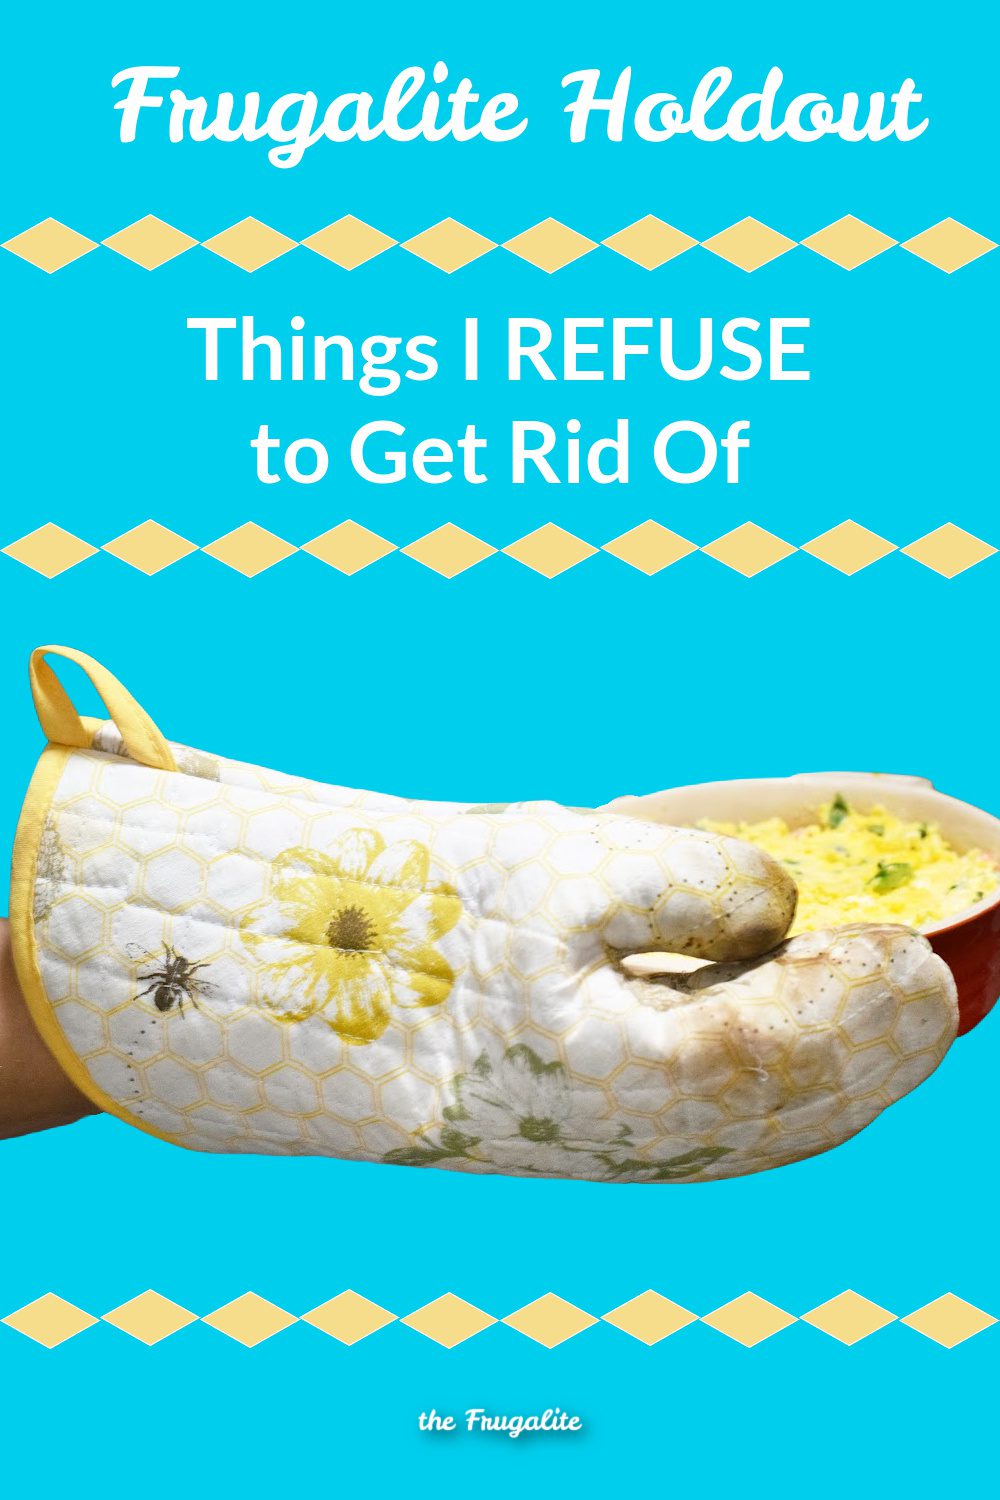 The Frugalite Holdout: Things I Refuse to Get Rid Of